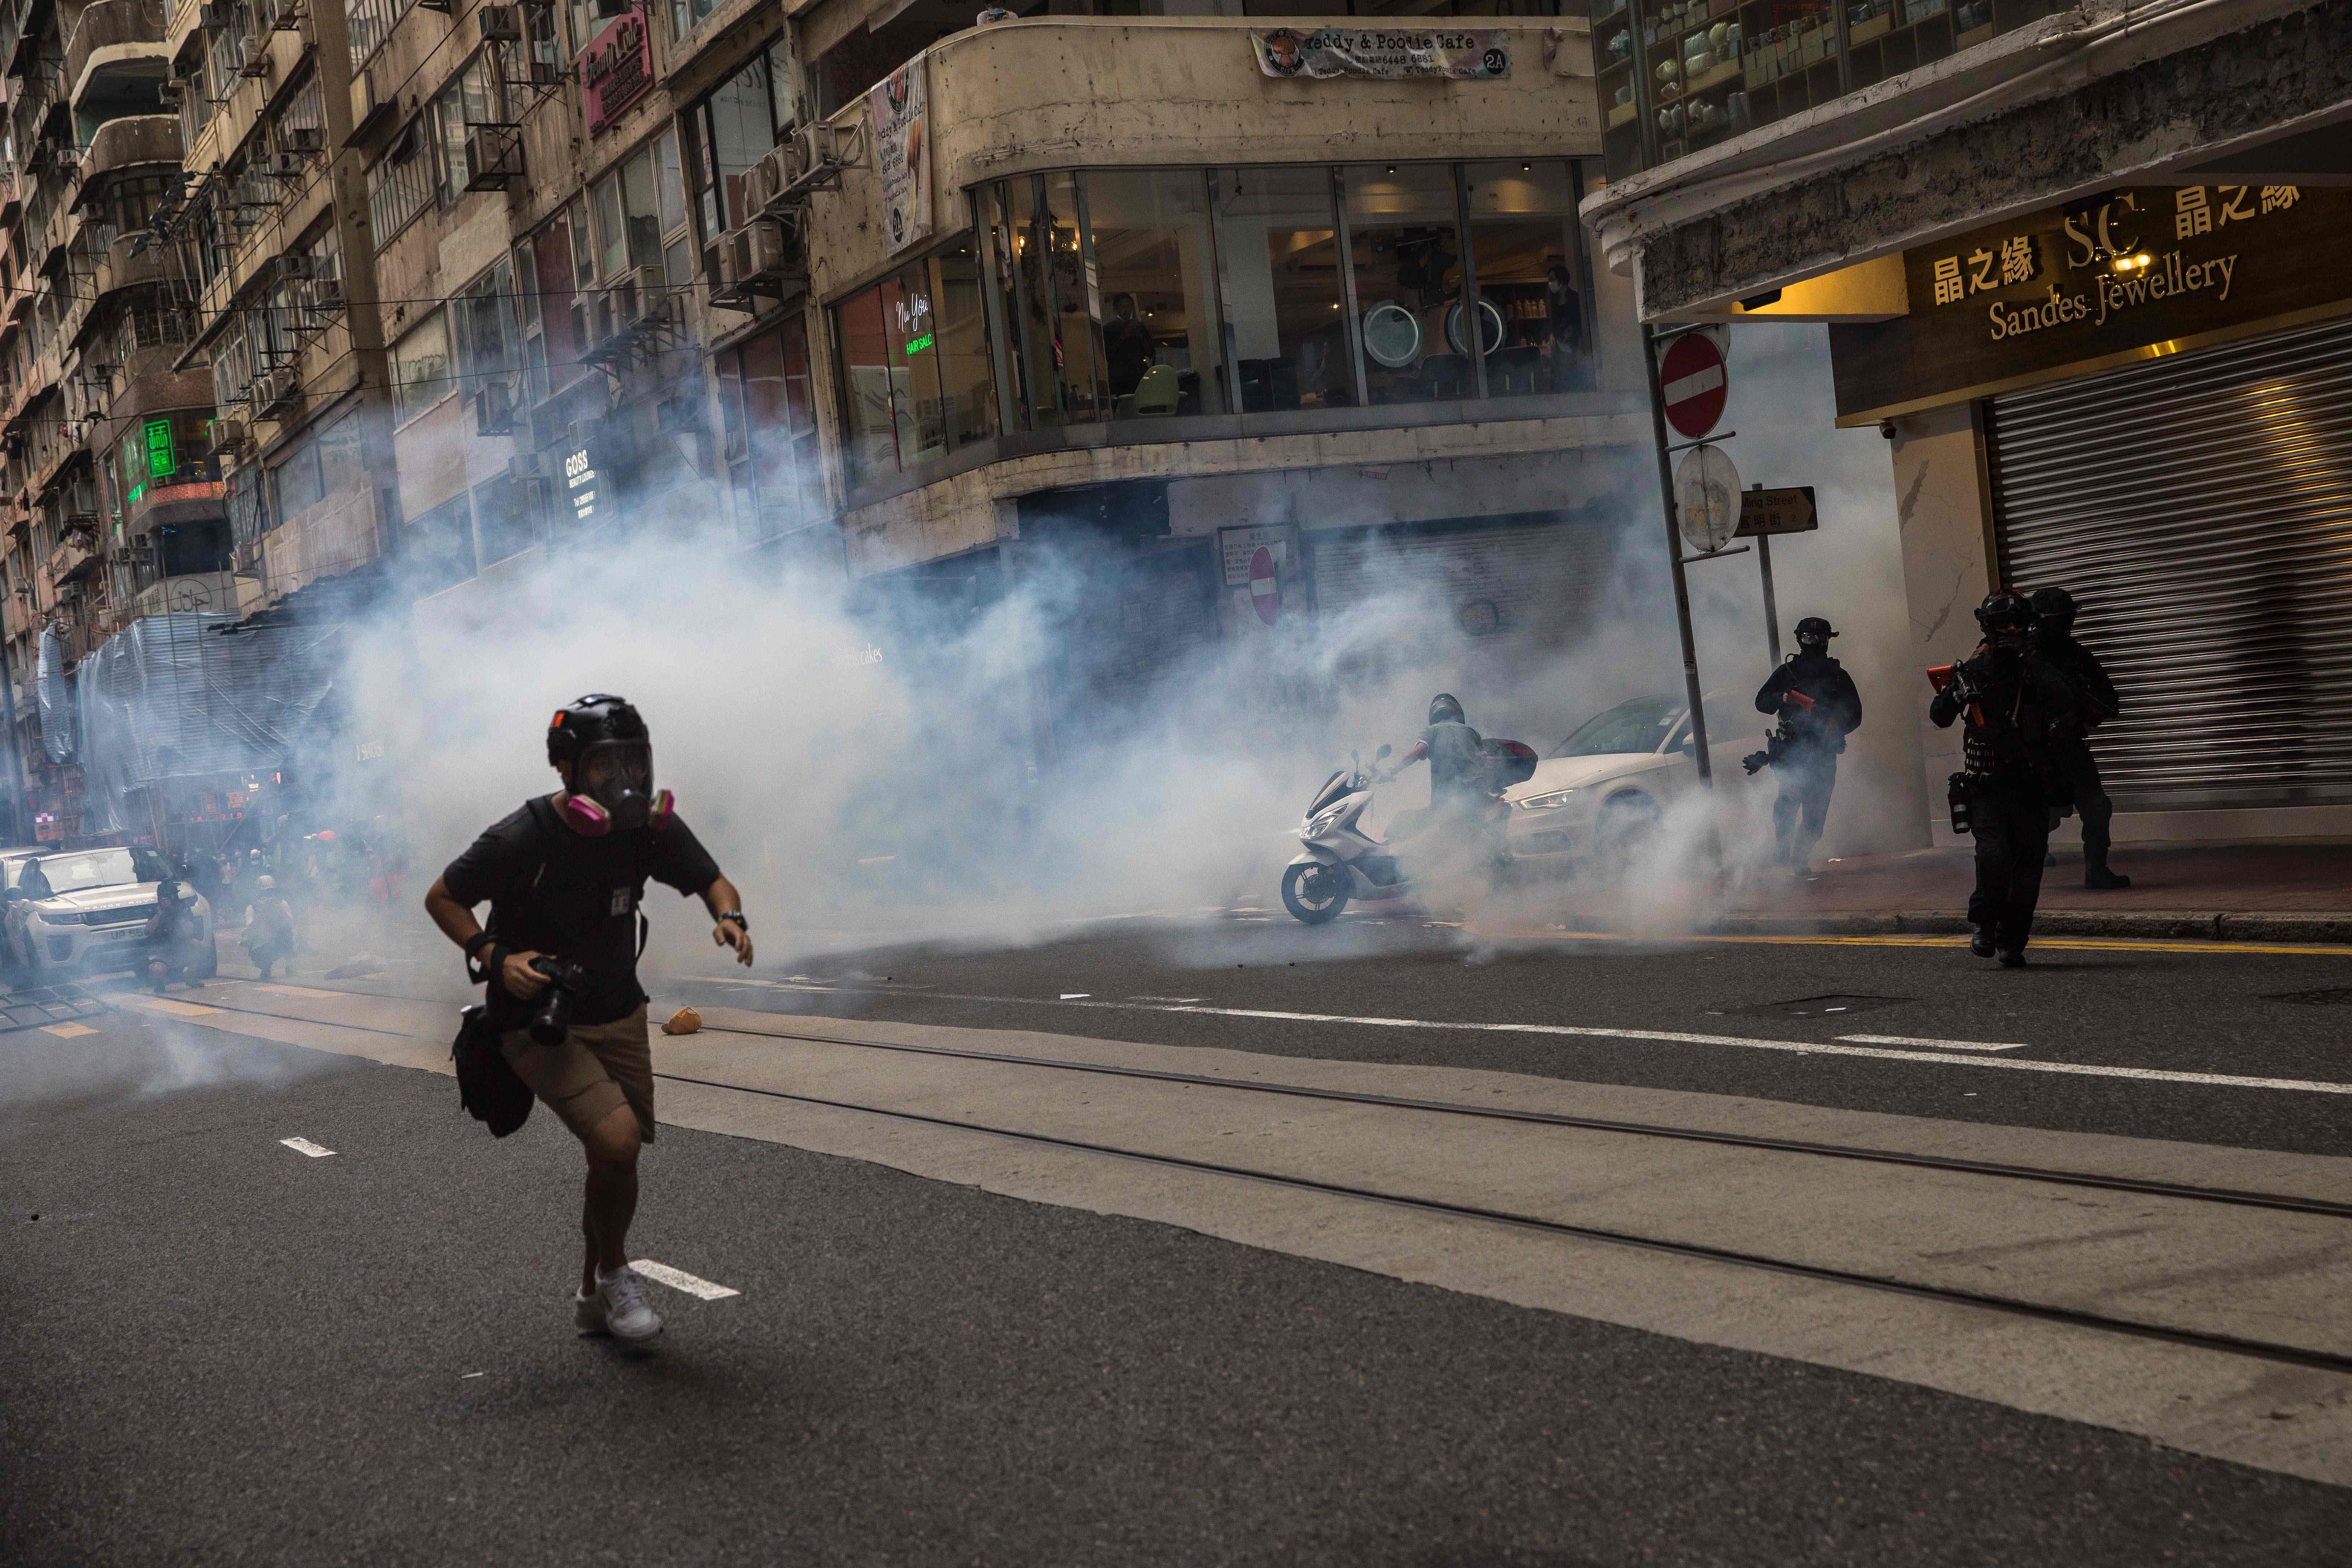 Riot police deploy tear gas as they clear protesters from a road during a rally against a new national security law in Hong Kong on July 1, 2020, on the 23rd anniversary of the city's handover from Britain to China. - Hong Kong police made the first arrests under Beijing's new national security law on July 1 as the city greeted the anniversary of its handover to China with protesters fleeing water cannon. (Photo by AFP)